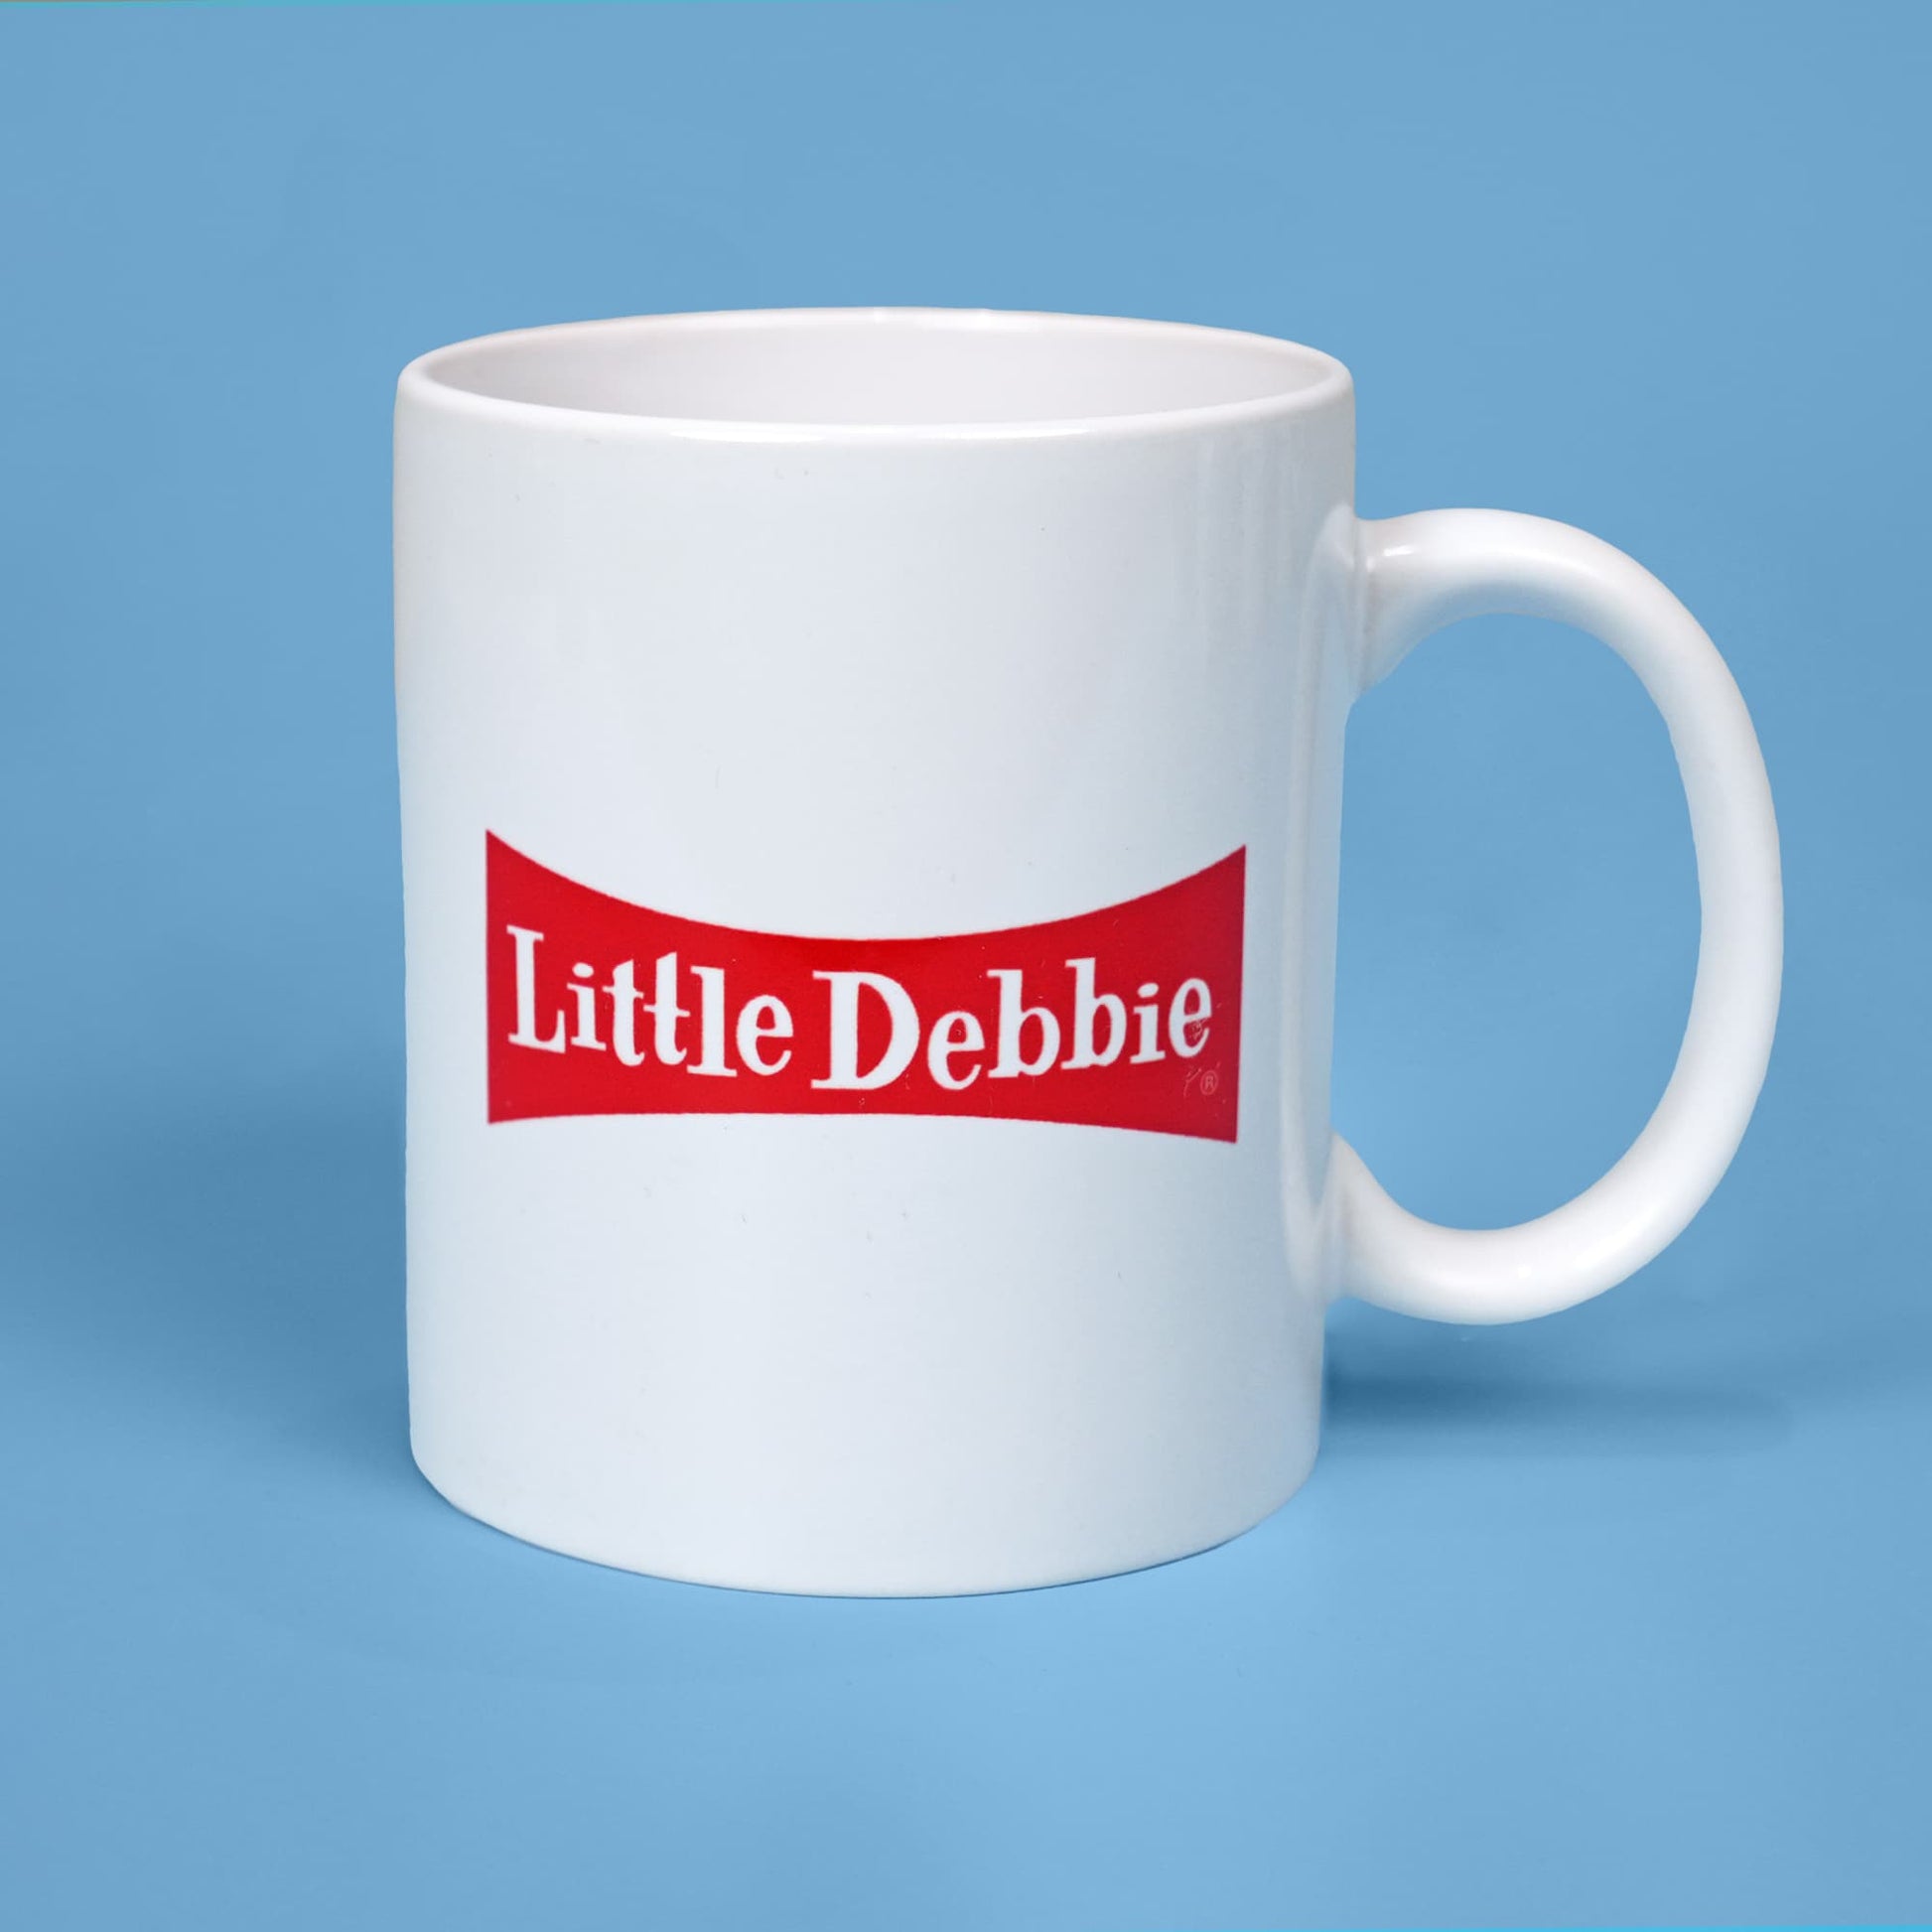 White ceramic mug with a red banner featuring the 'Little Debbie' logo in white letters, set against a light blue background. The mug has a simple, clean design with a classic brand logo, emphasizing the red and white color scheme.